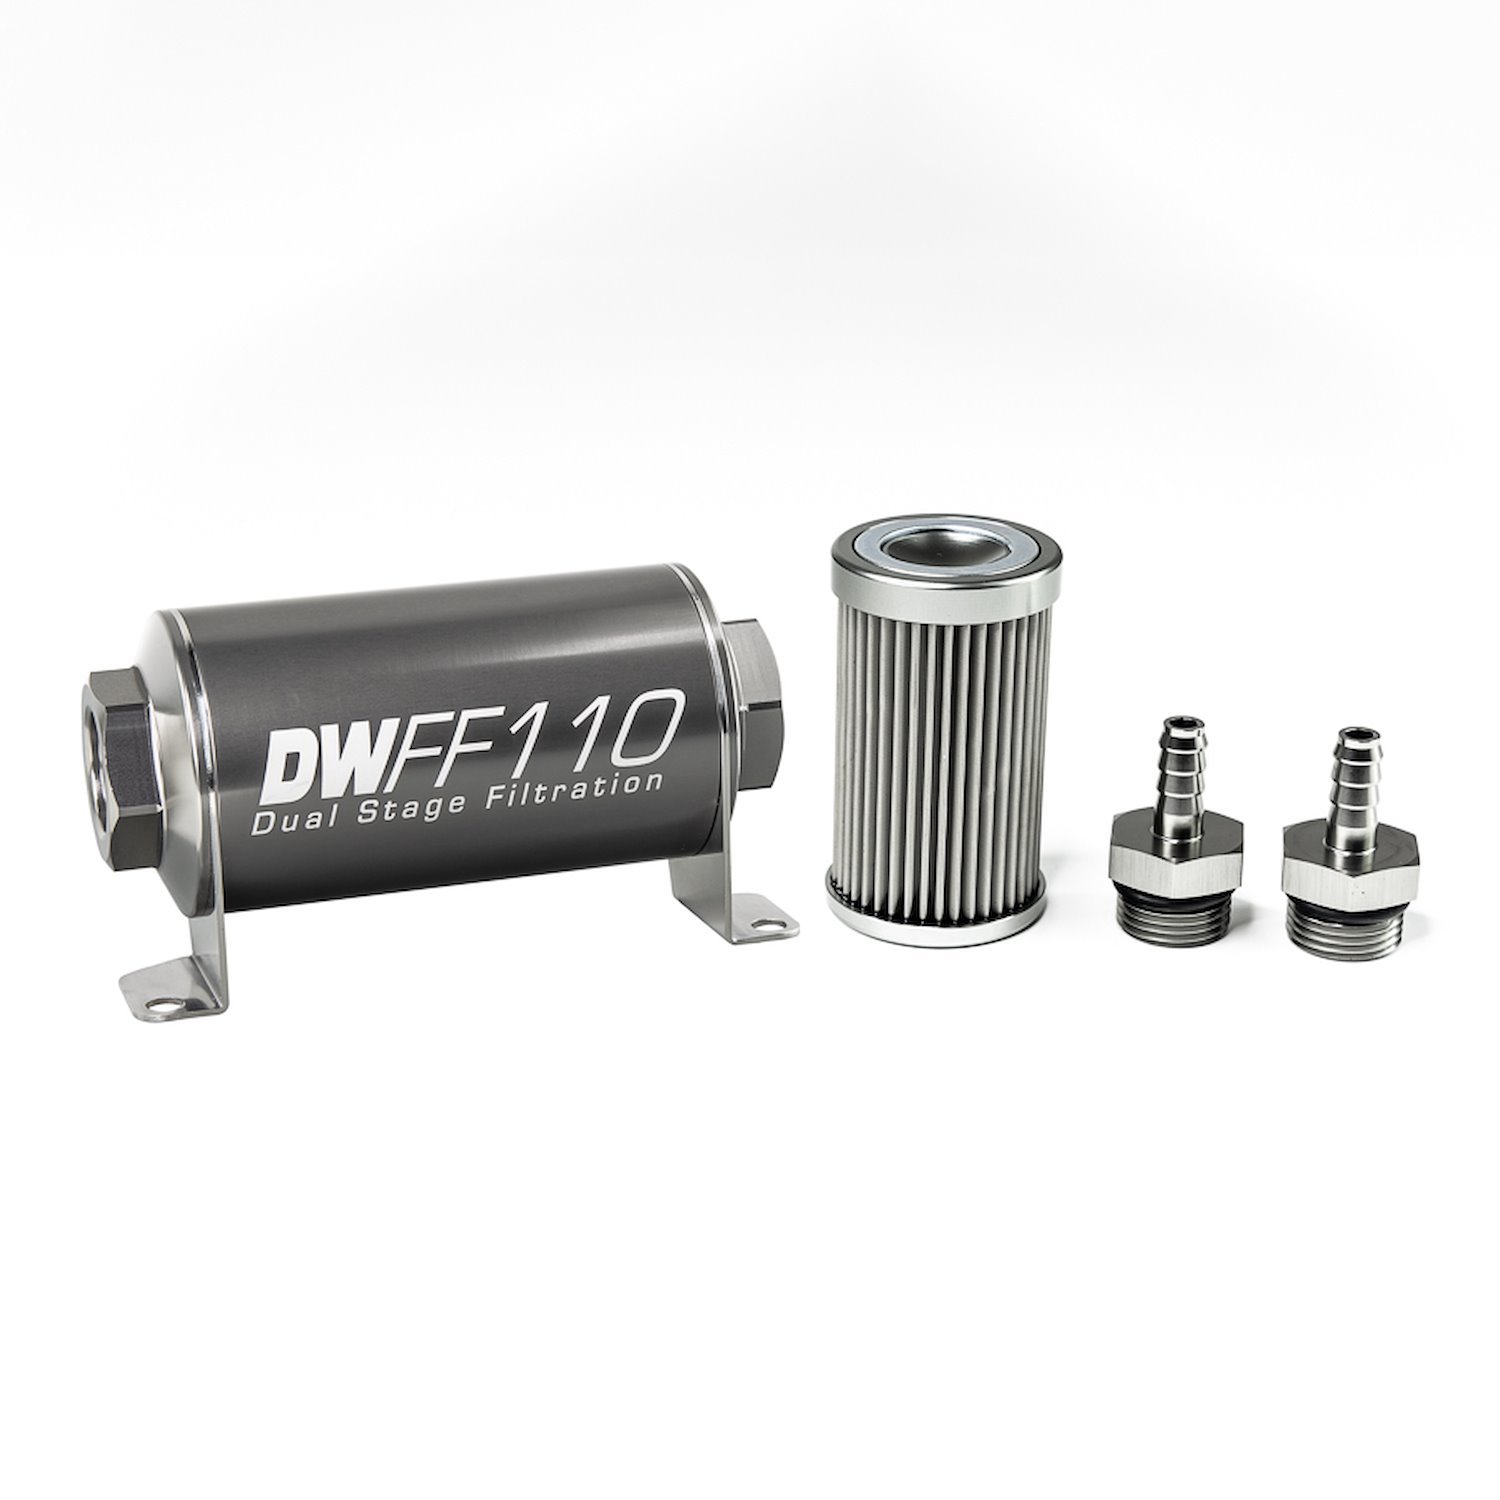 803110010K51 In-line fuel filter element and housing kit stainless steel 10 micron 5/16in hose barb 110mm. Universal